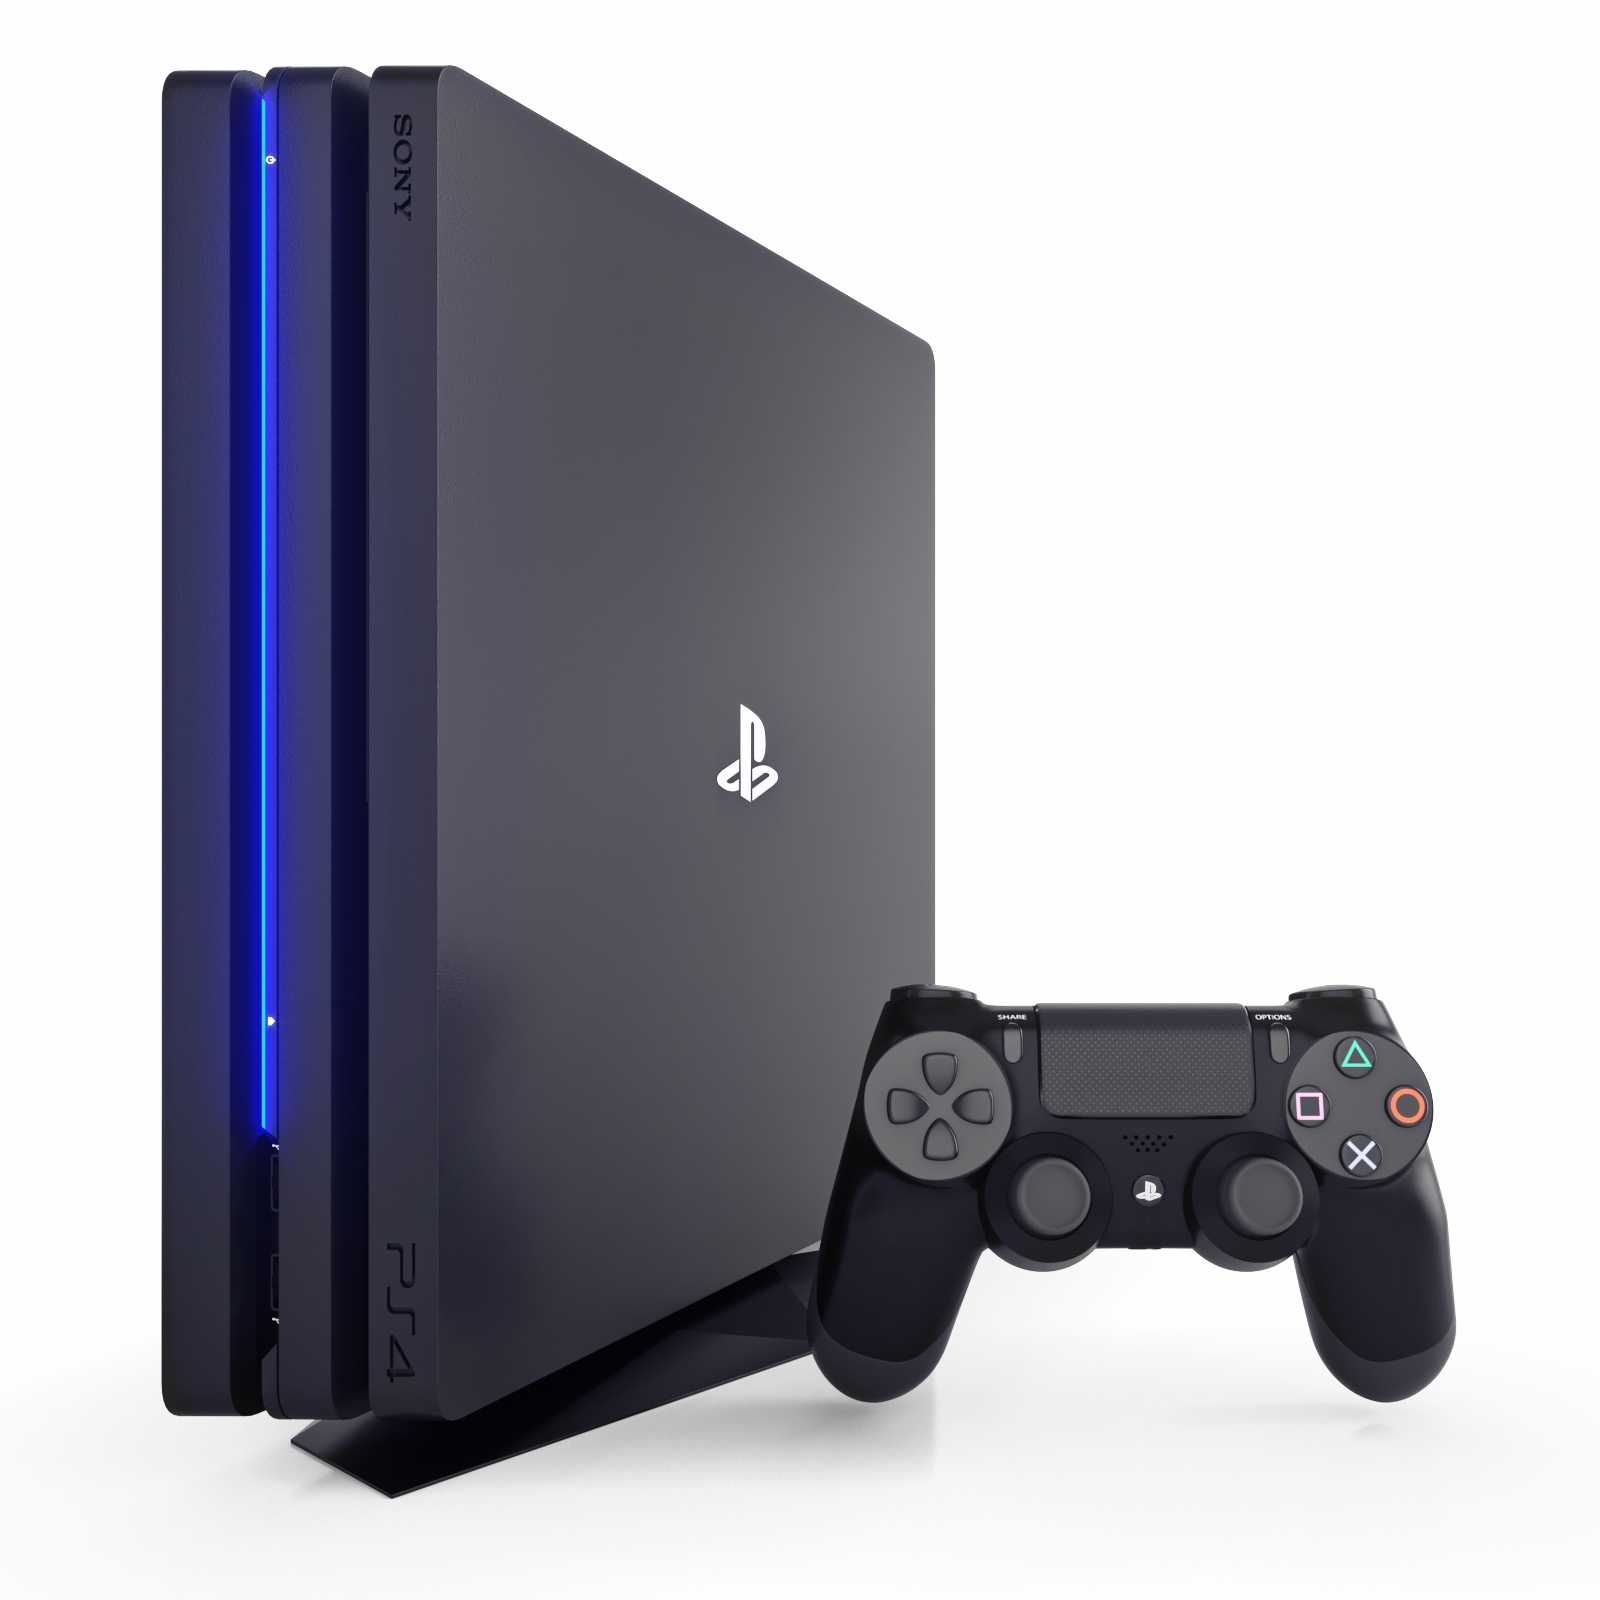 Reparatii/service/playstation 4,xbox one,laptop,ps4